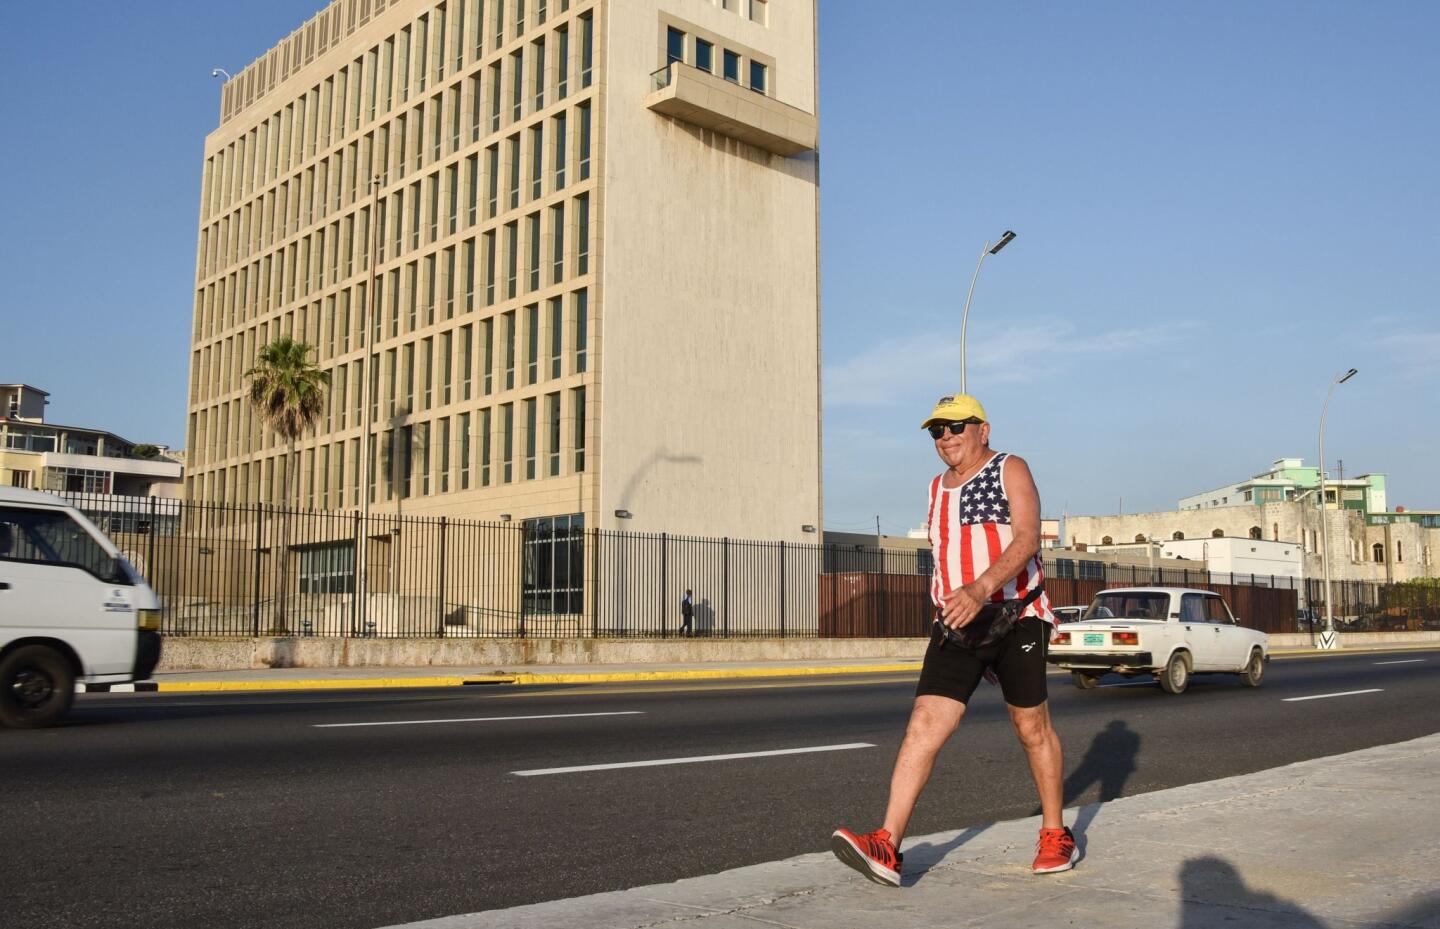 A man wearing a sleeveless shirt with the U.S. flag walks along the Malecon seafront in Cuba near the U.S. Embassy on July 20, 2015.